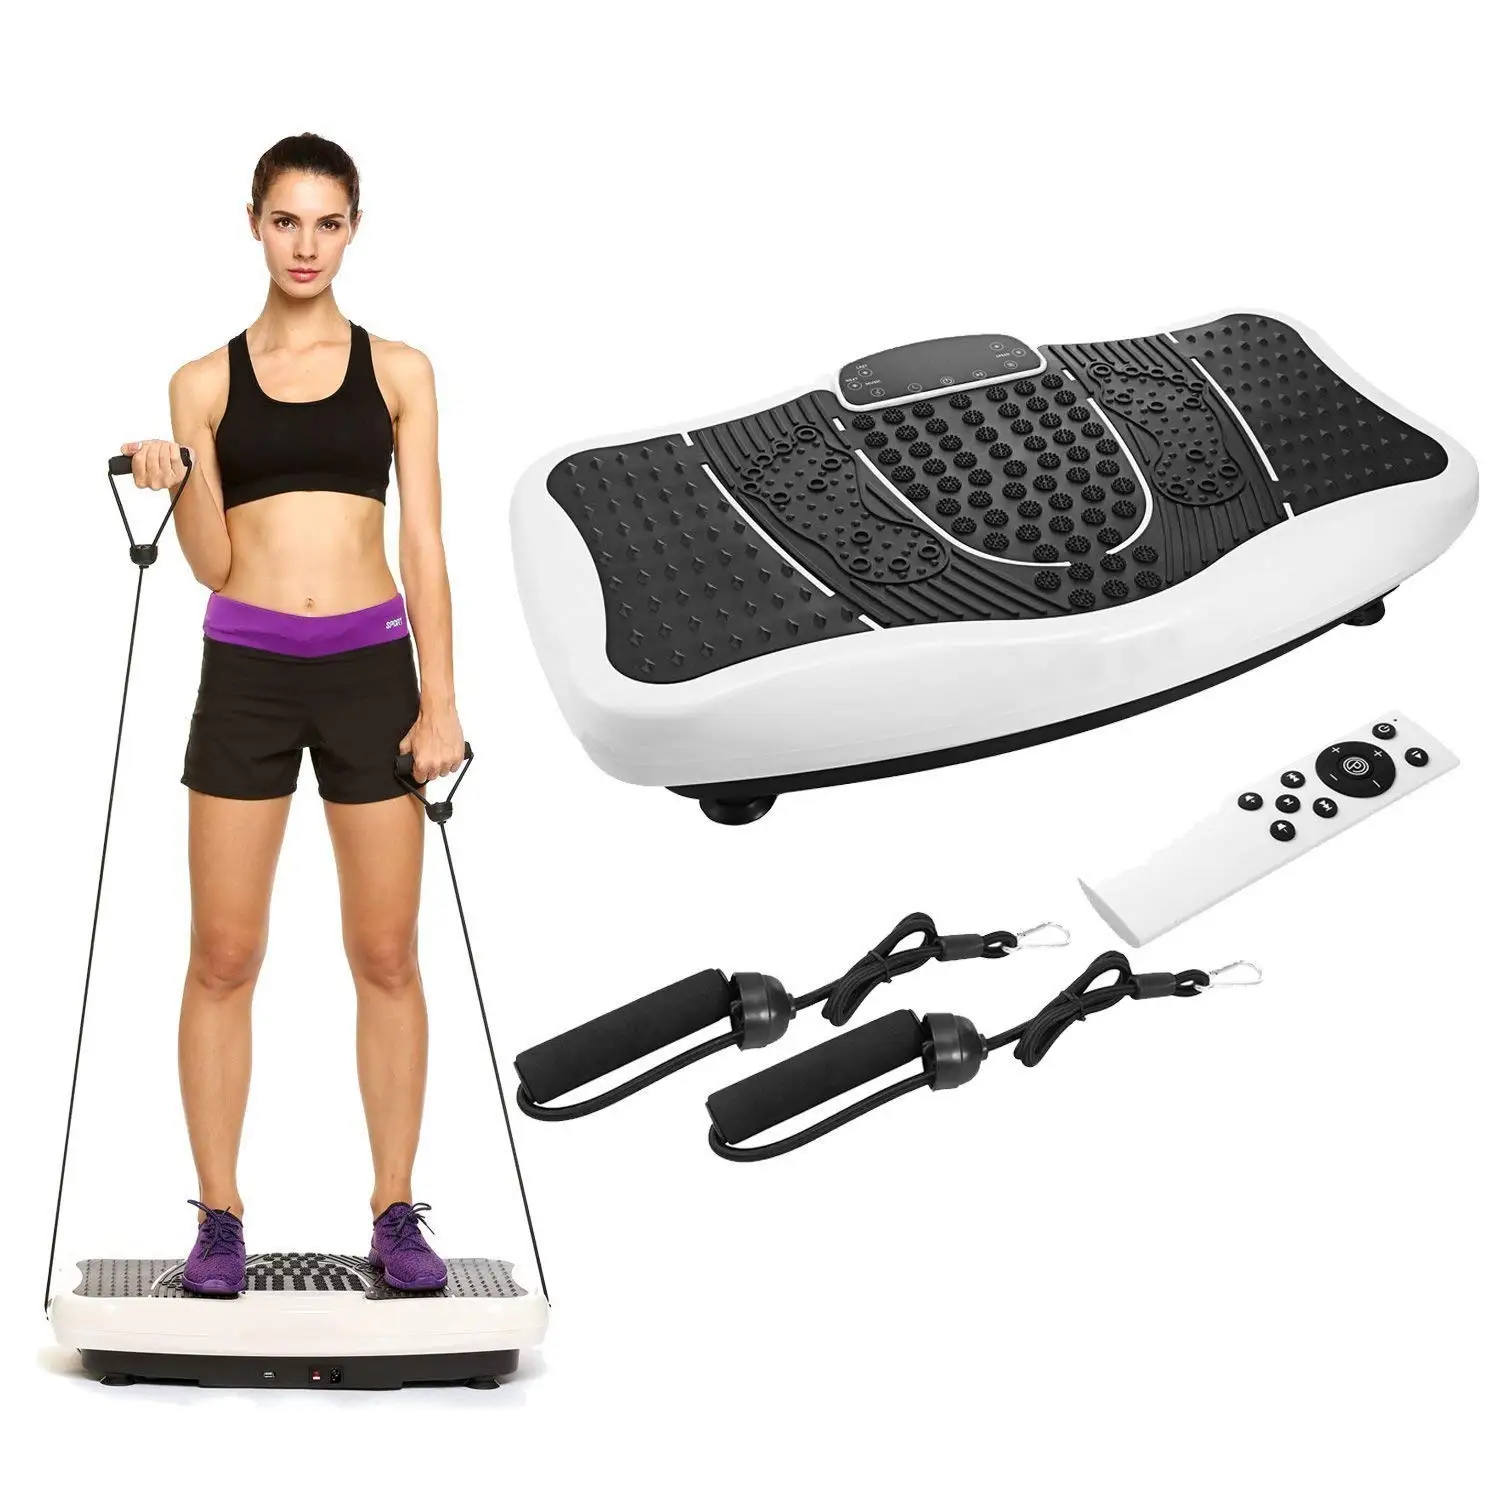 TOMSHOO Whole Body Vibration Platform Plate Fitness Machine Workout Trainer Hips Muscle Weight Loss Exercise Equipment